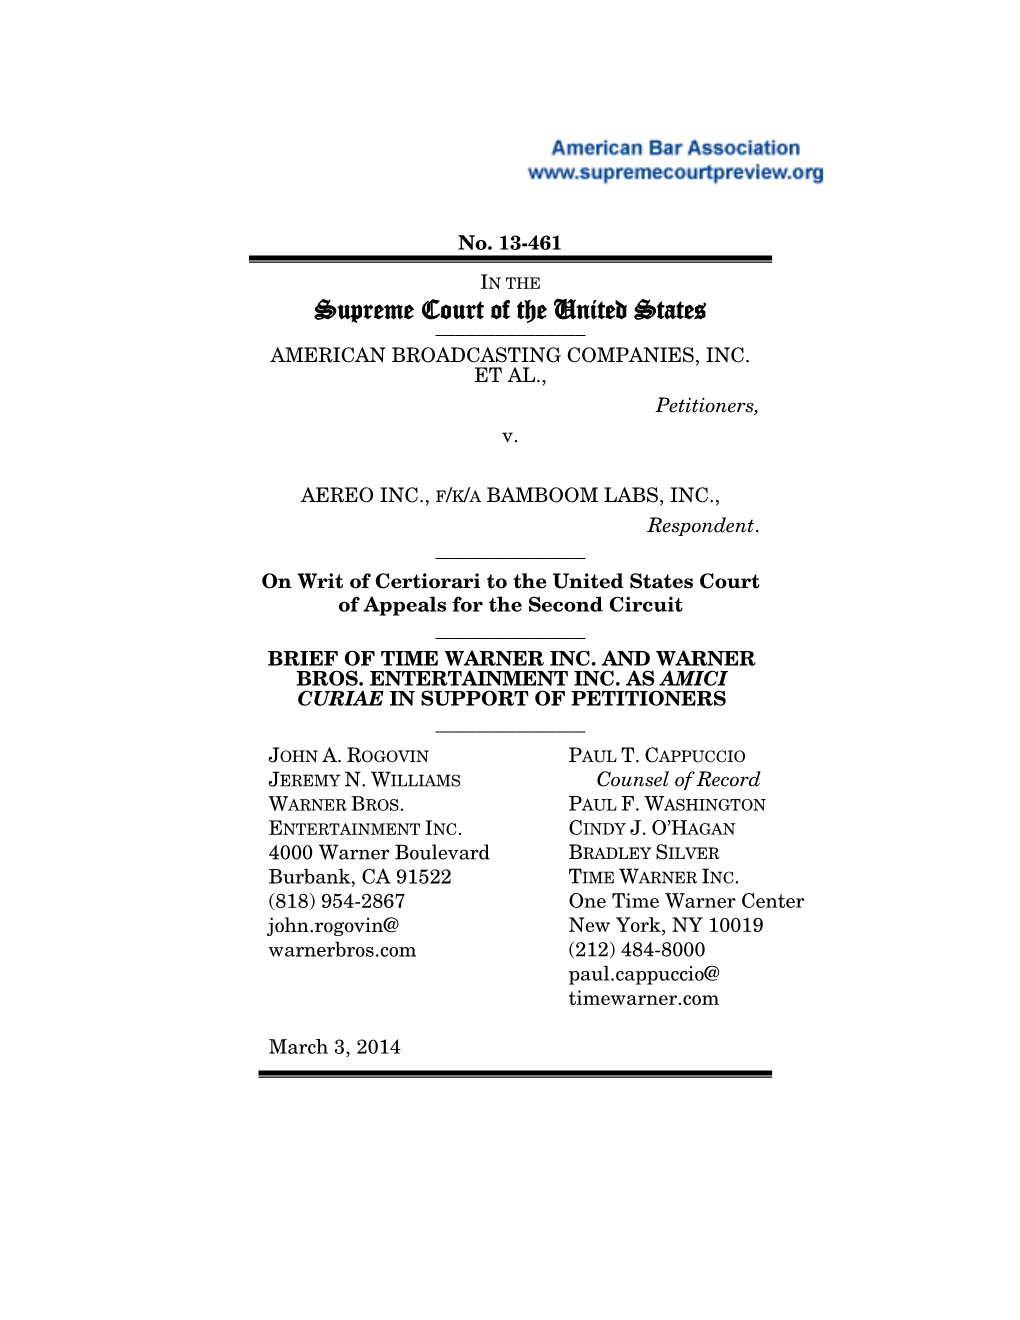 13-461 Brief for Time Warner Inc. and Warner Bros. Entertainment Inc. In